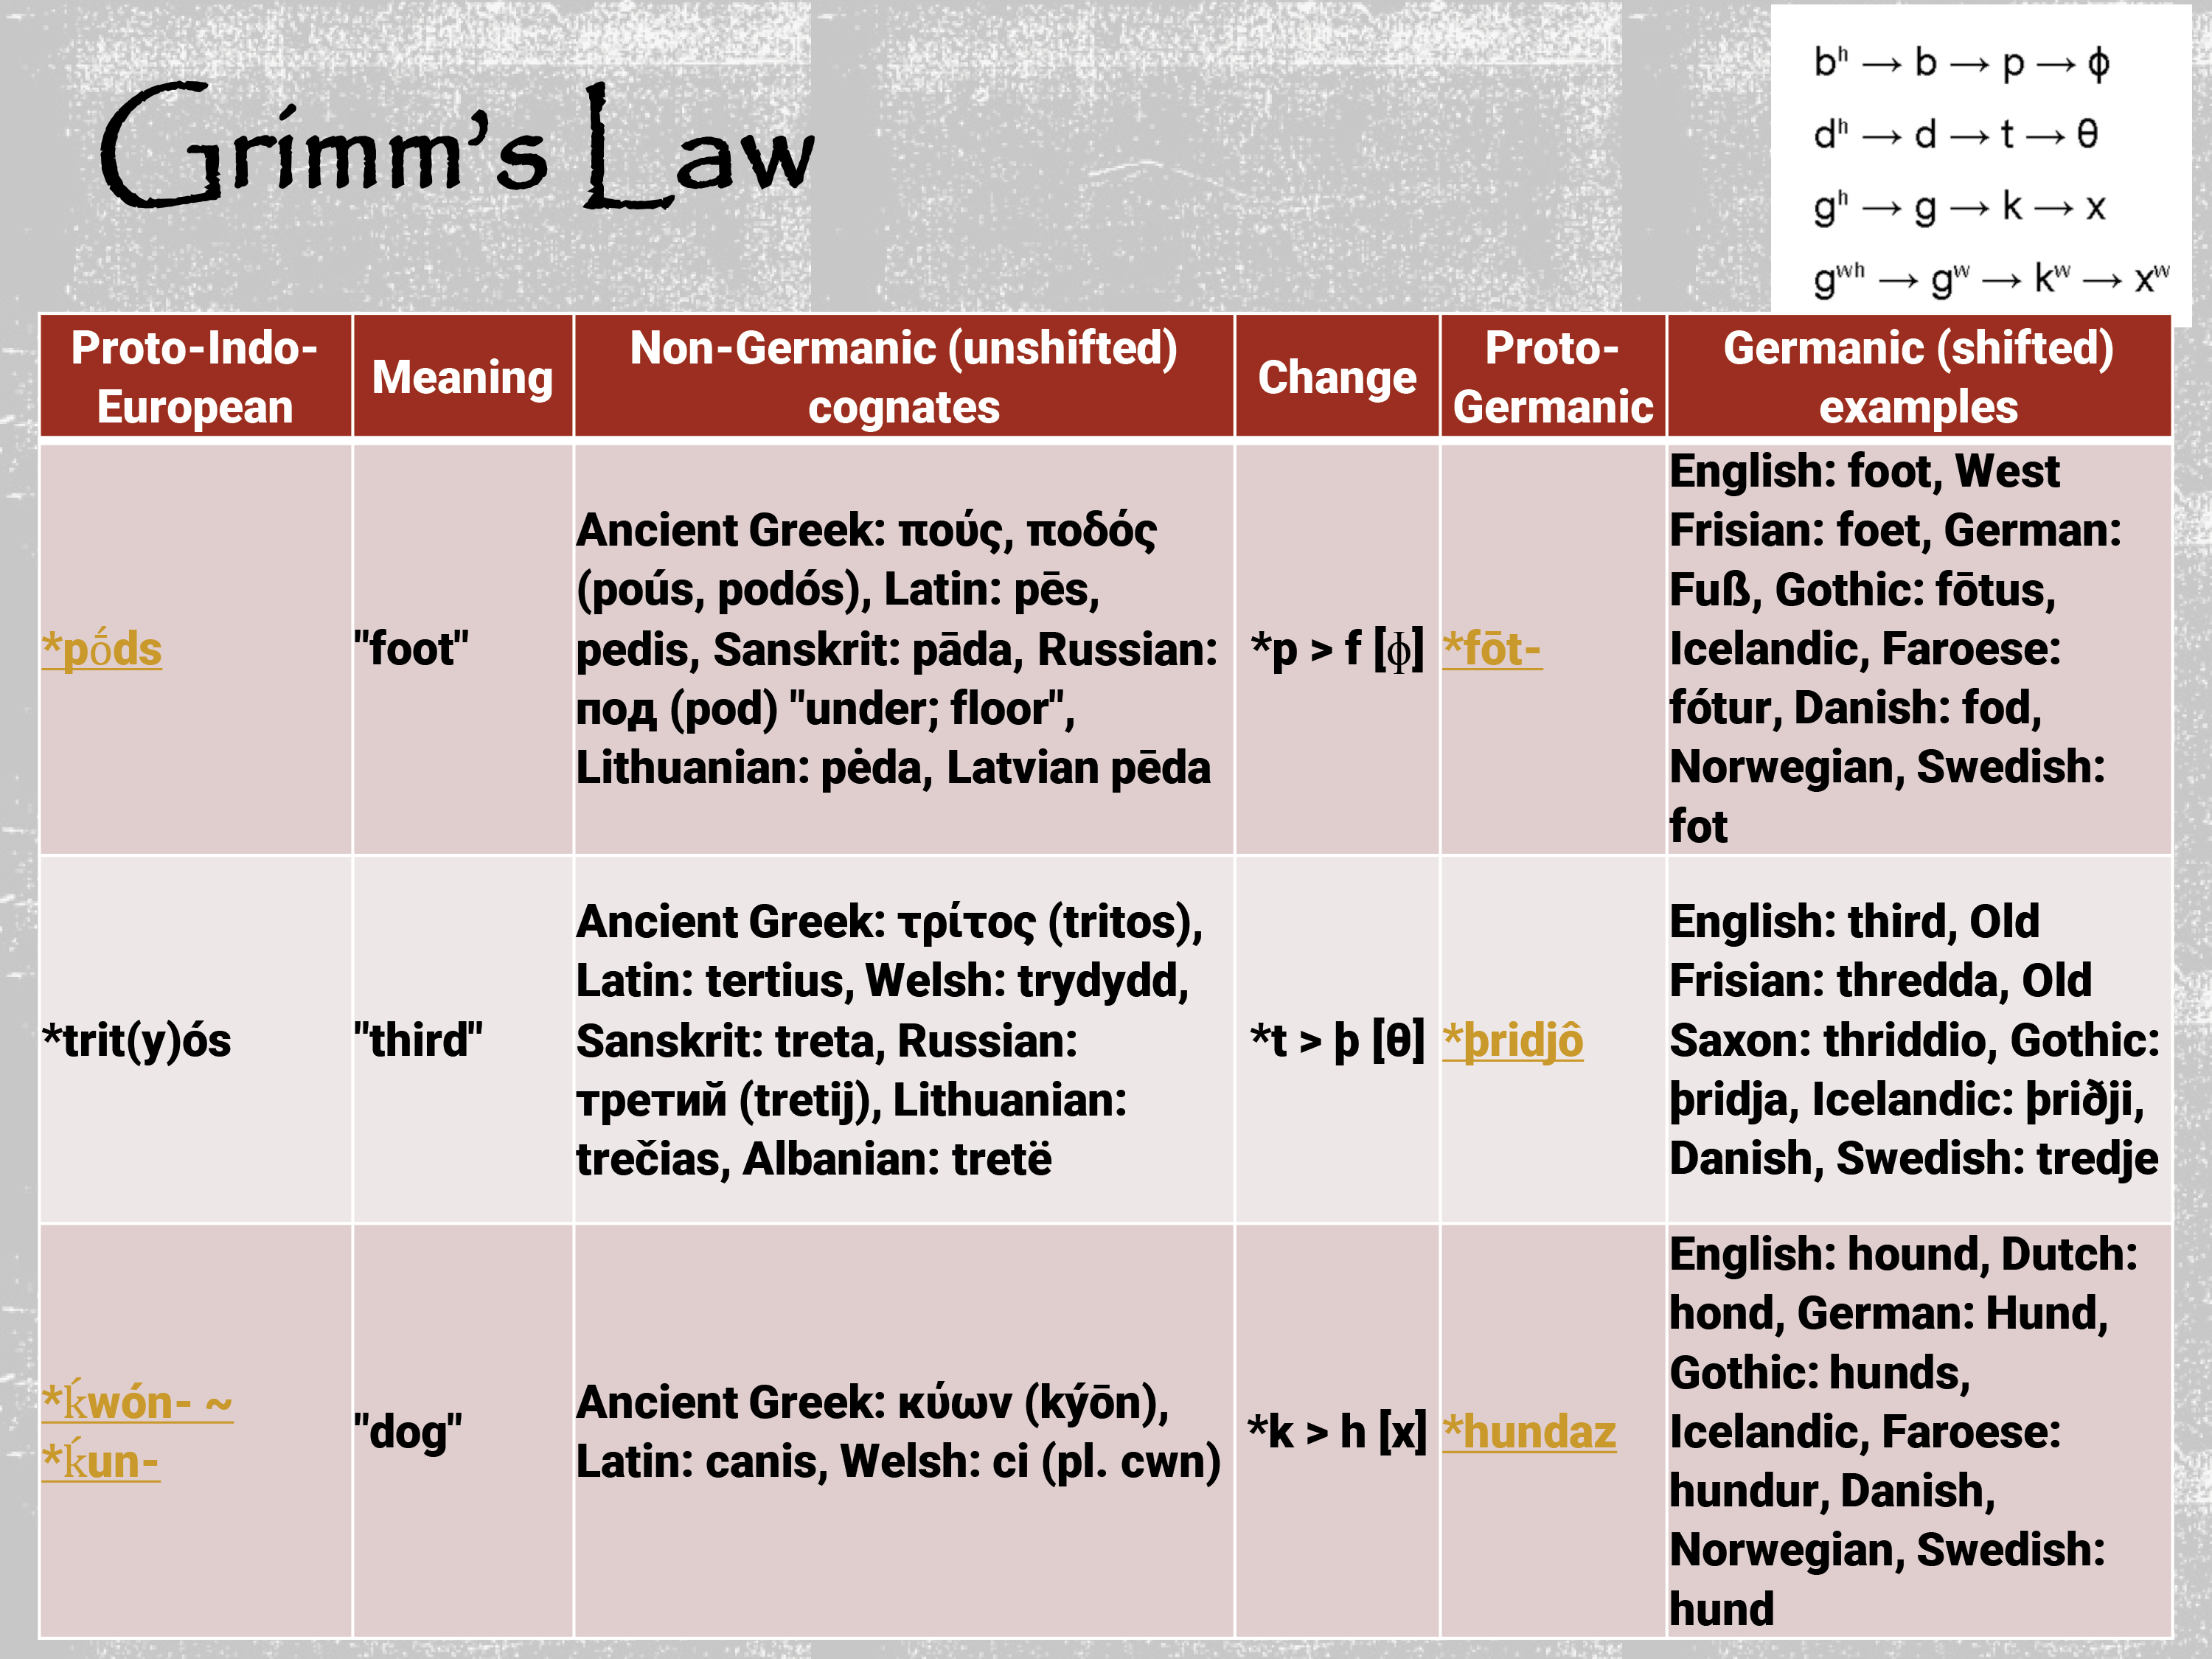 Grimms Law table and breakdown